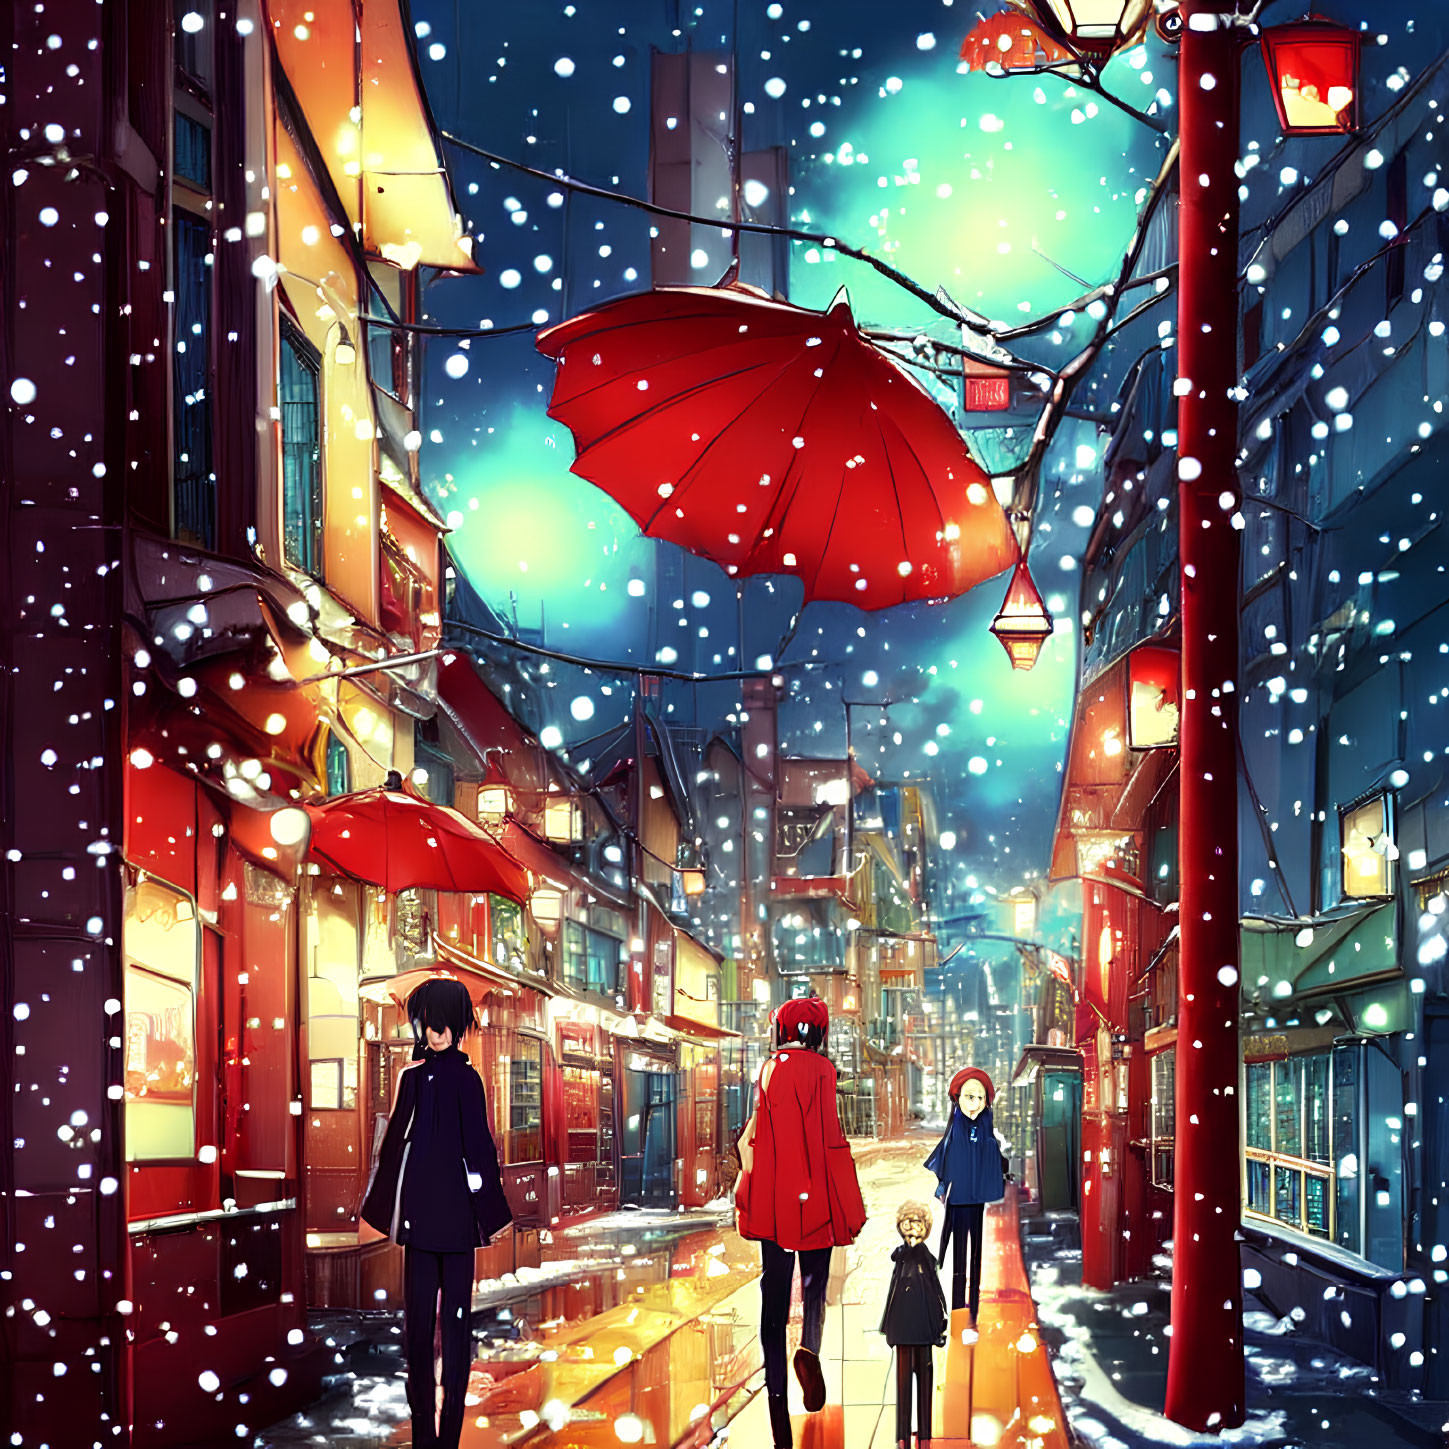 Snowy Twilight Street Scene with Red Umbrella and Festive Lights